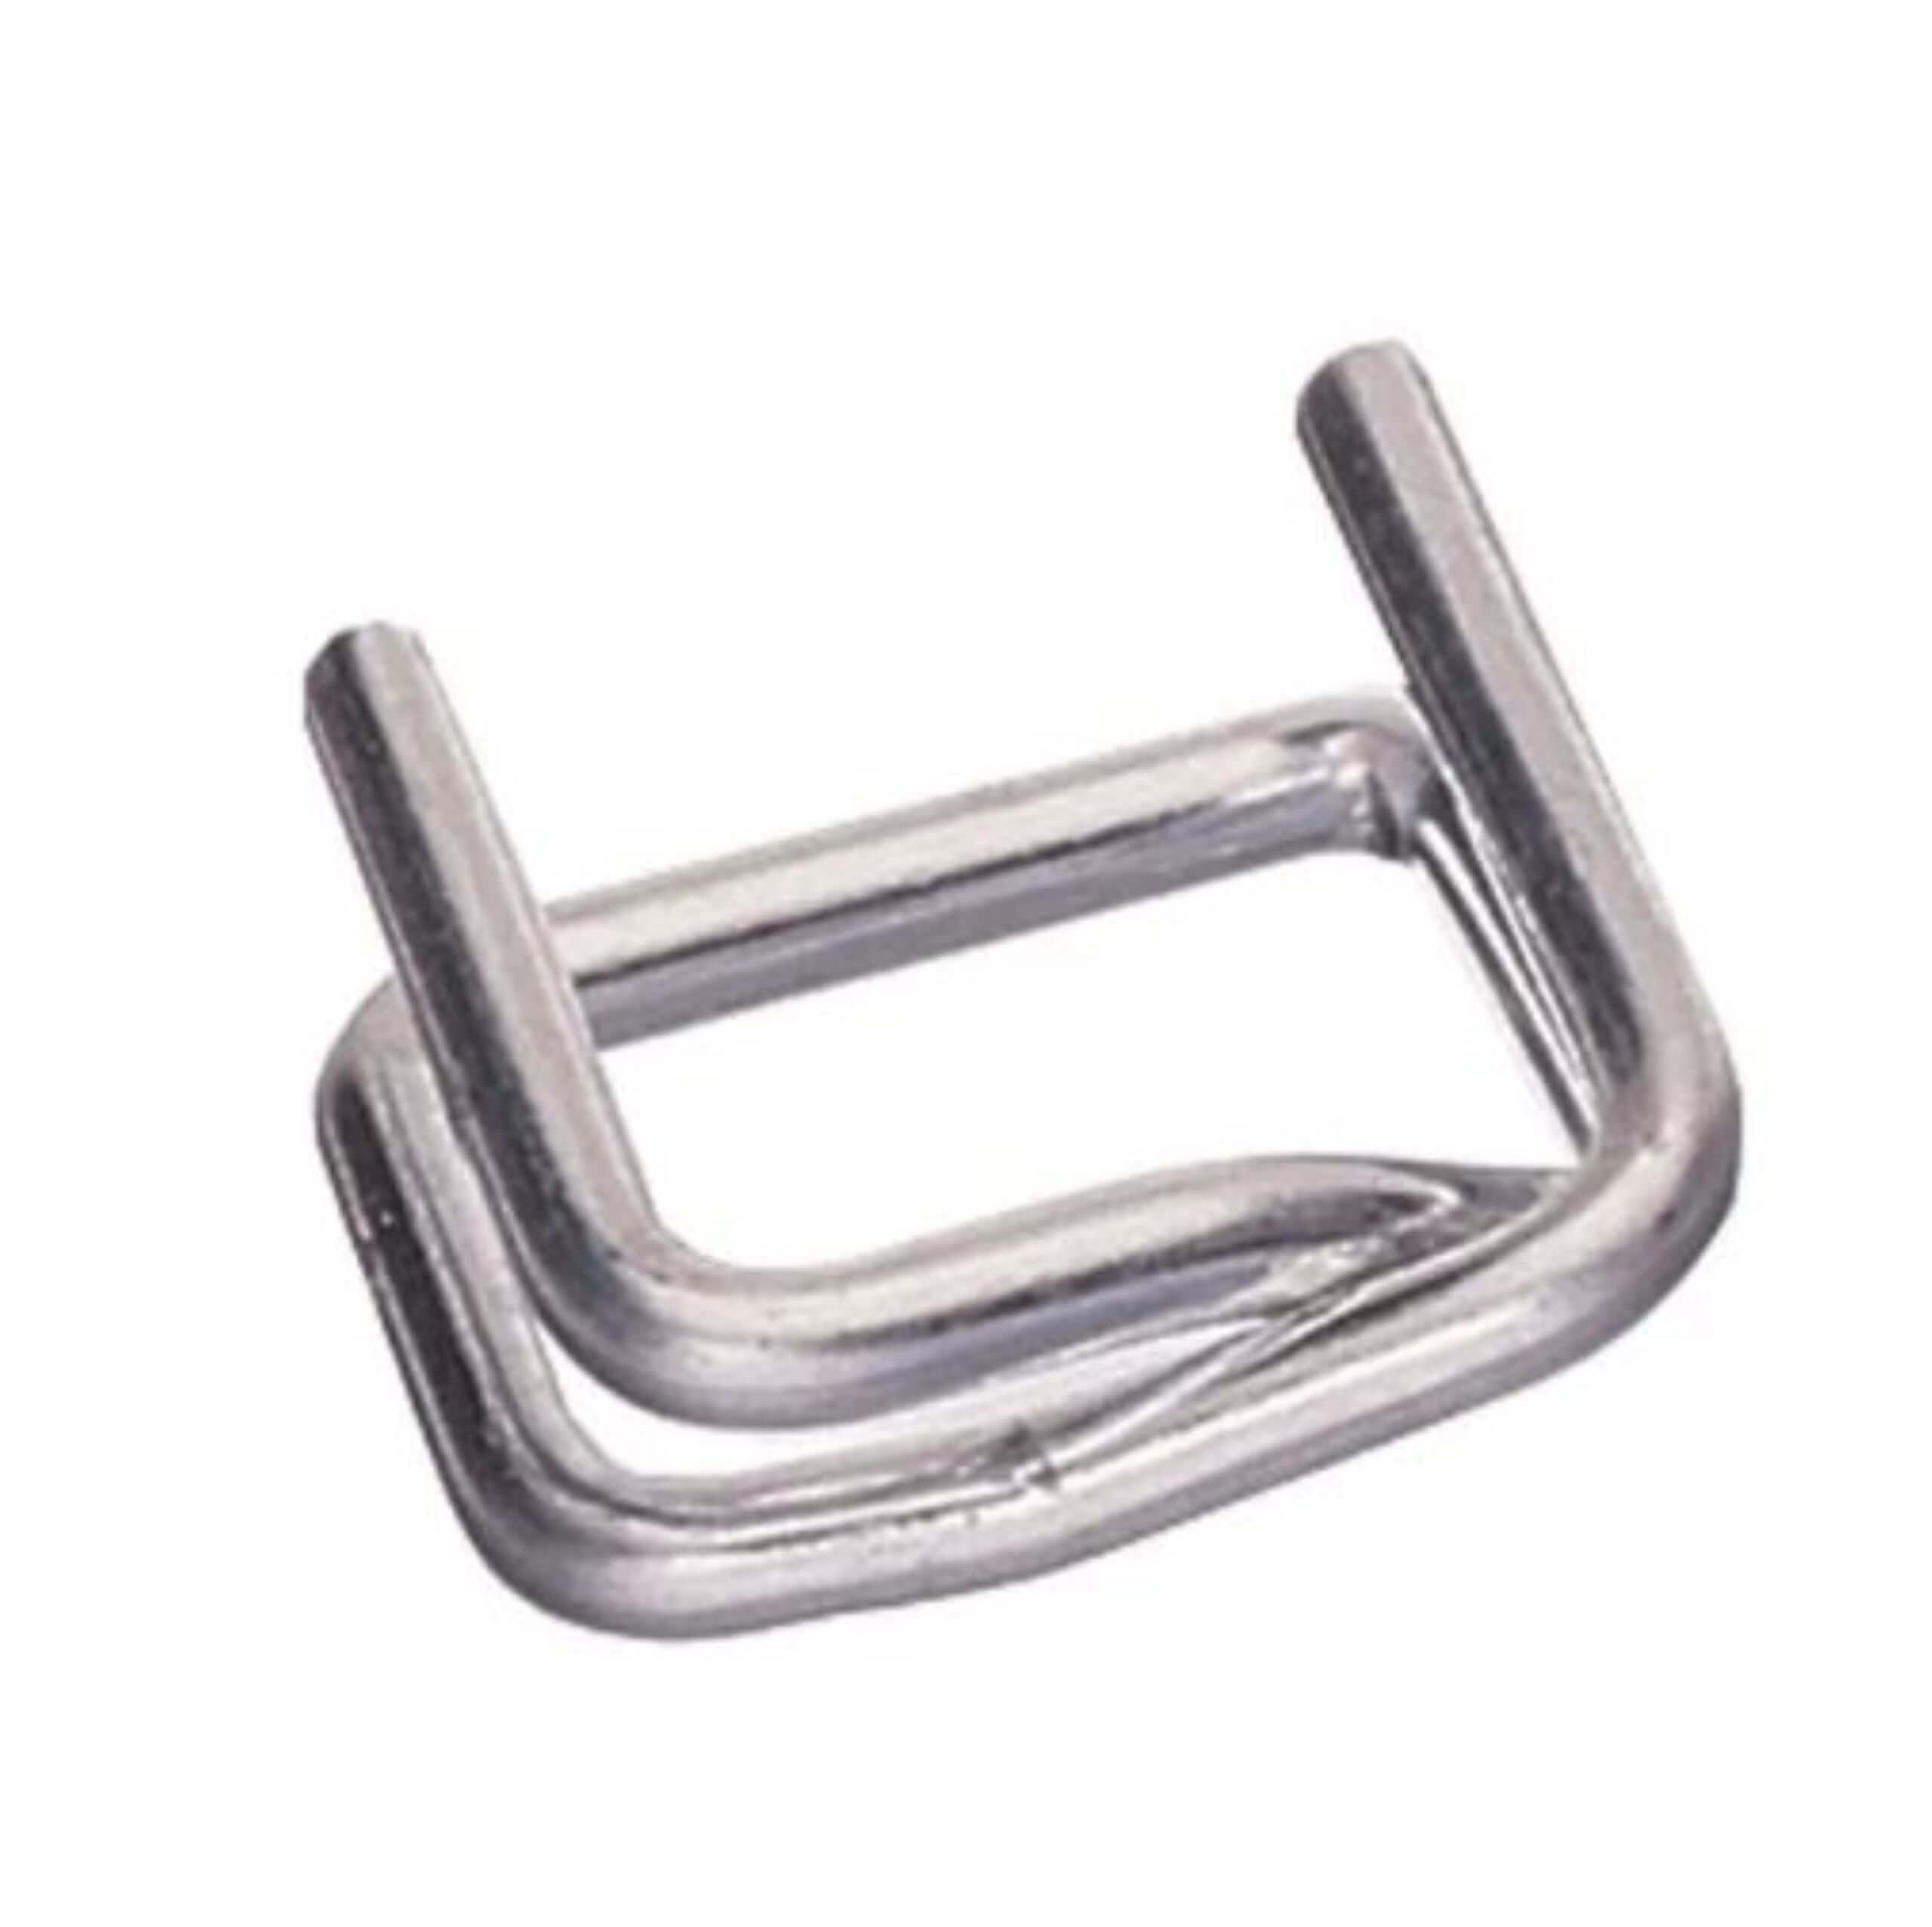 An image of our Galvanised Buckles for Strapping.